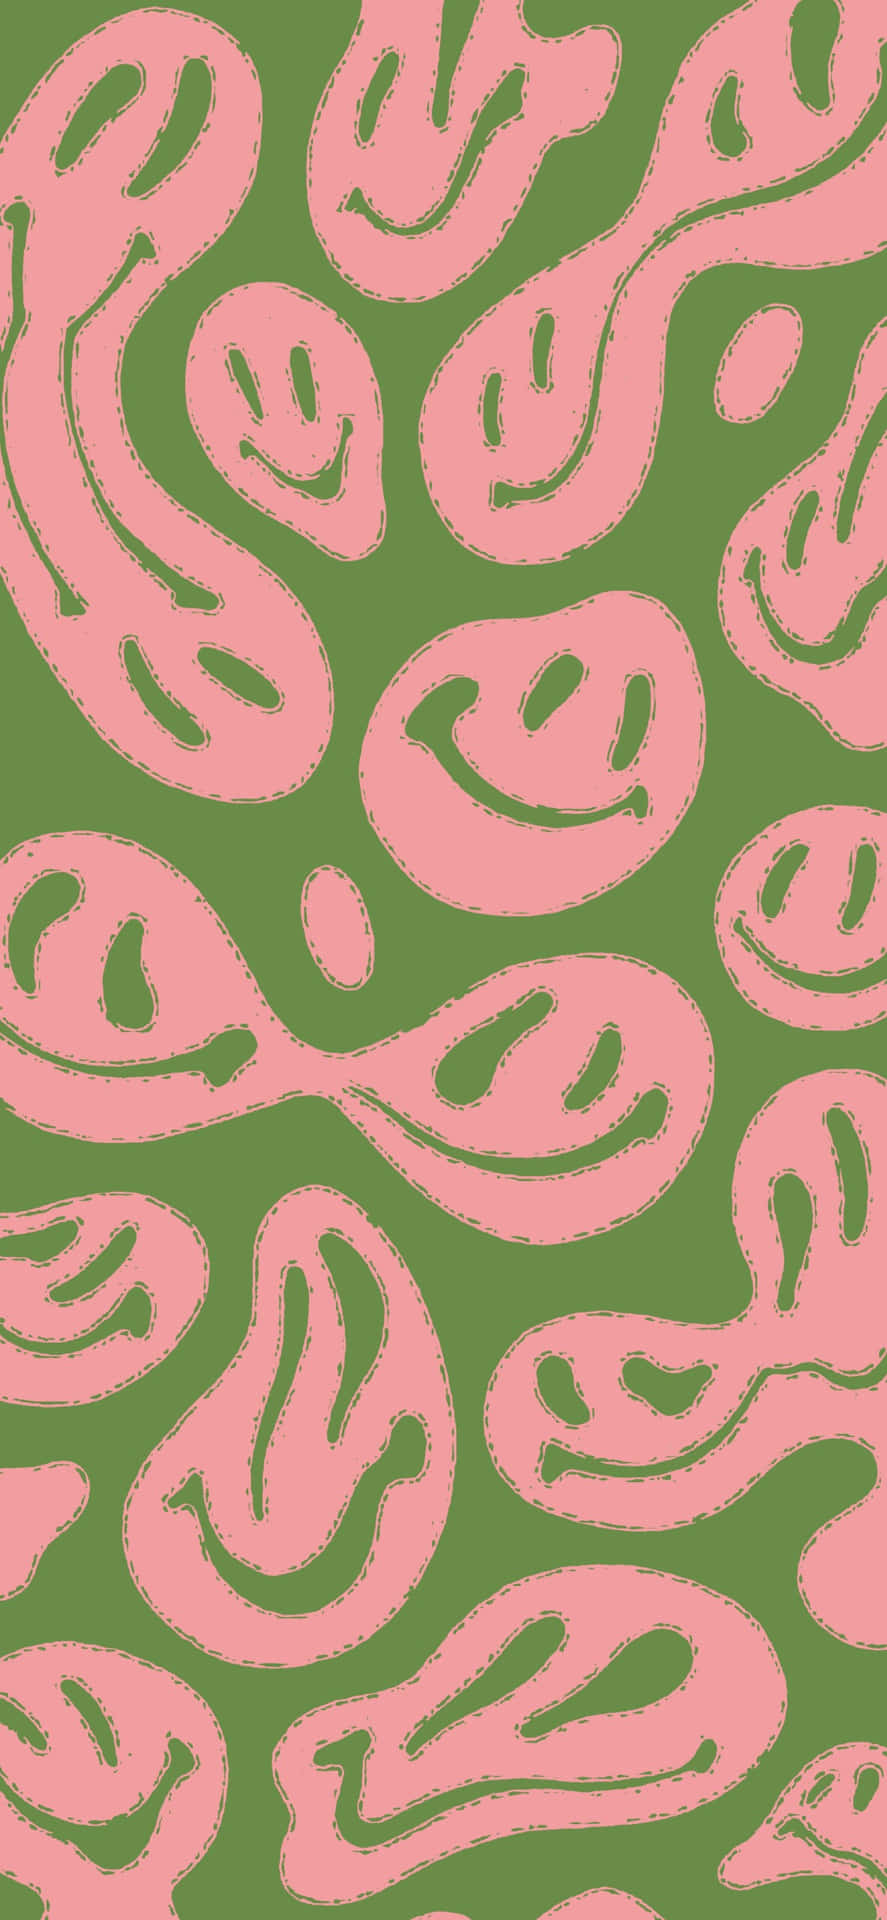 Abstract Smiley Face Pattern Green Pink.jpg Wallpaper